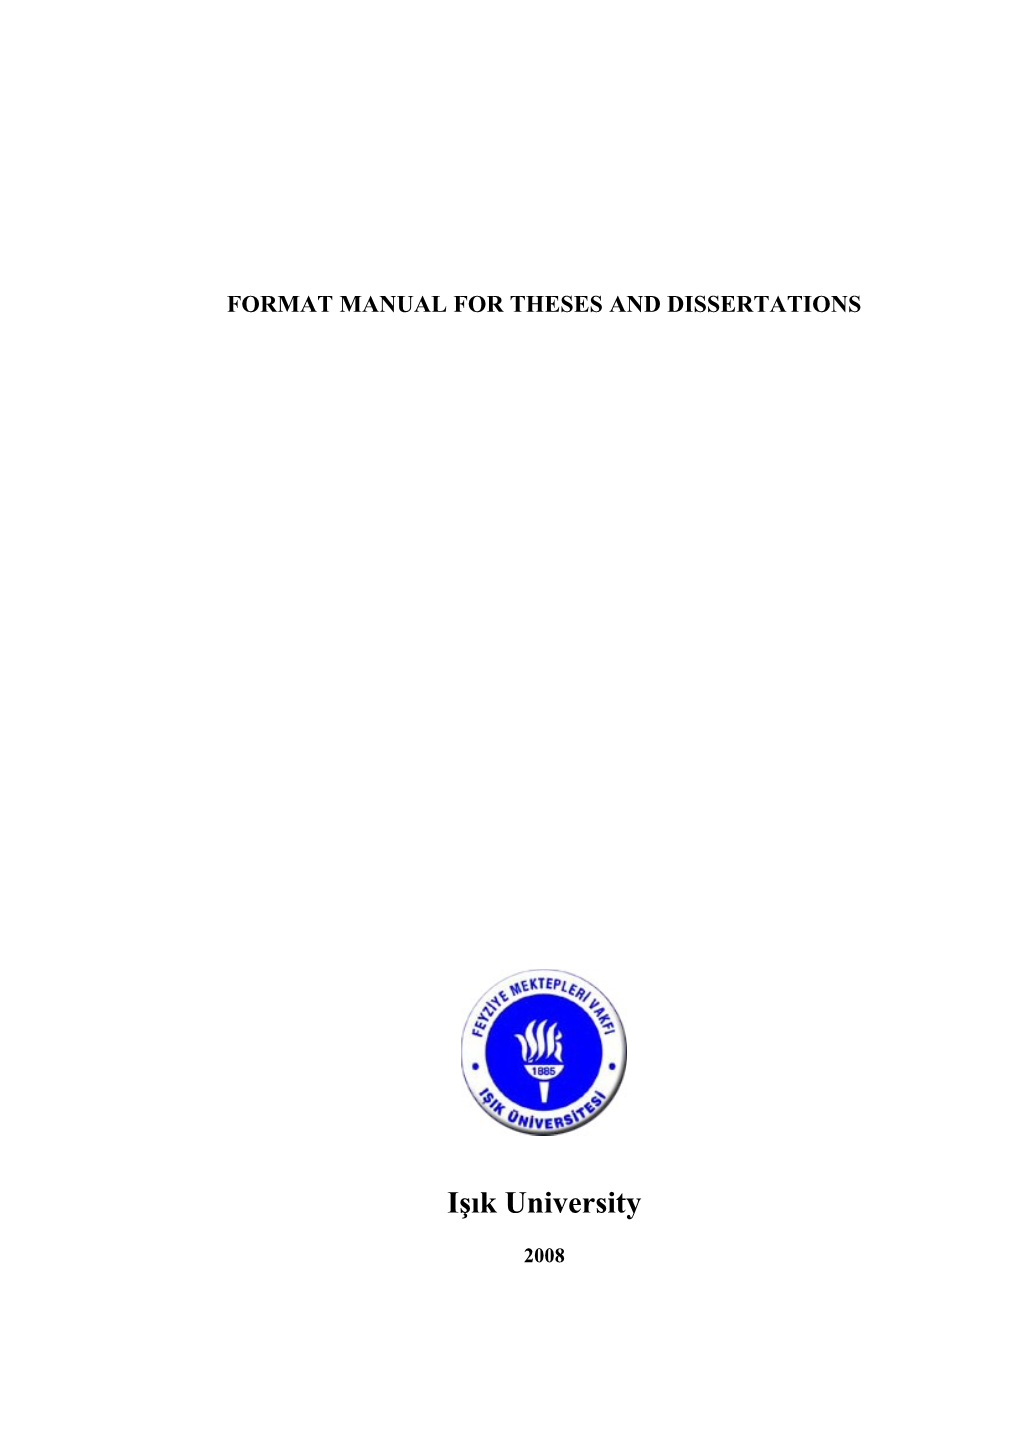 A Style Manual for Writing Graduate Theses and Dissertations